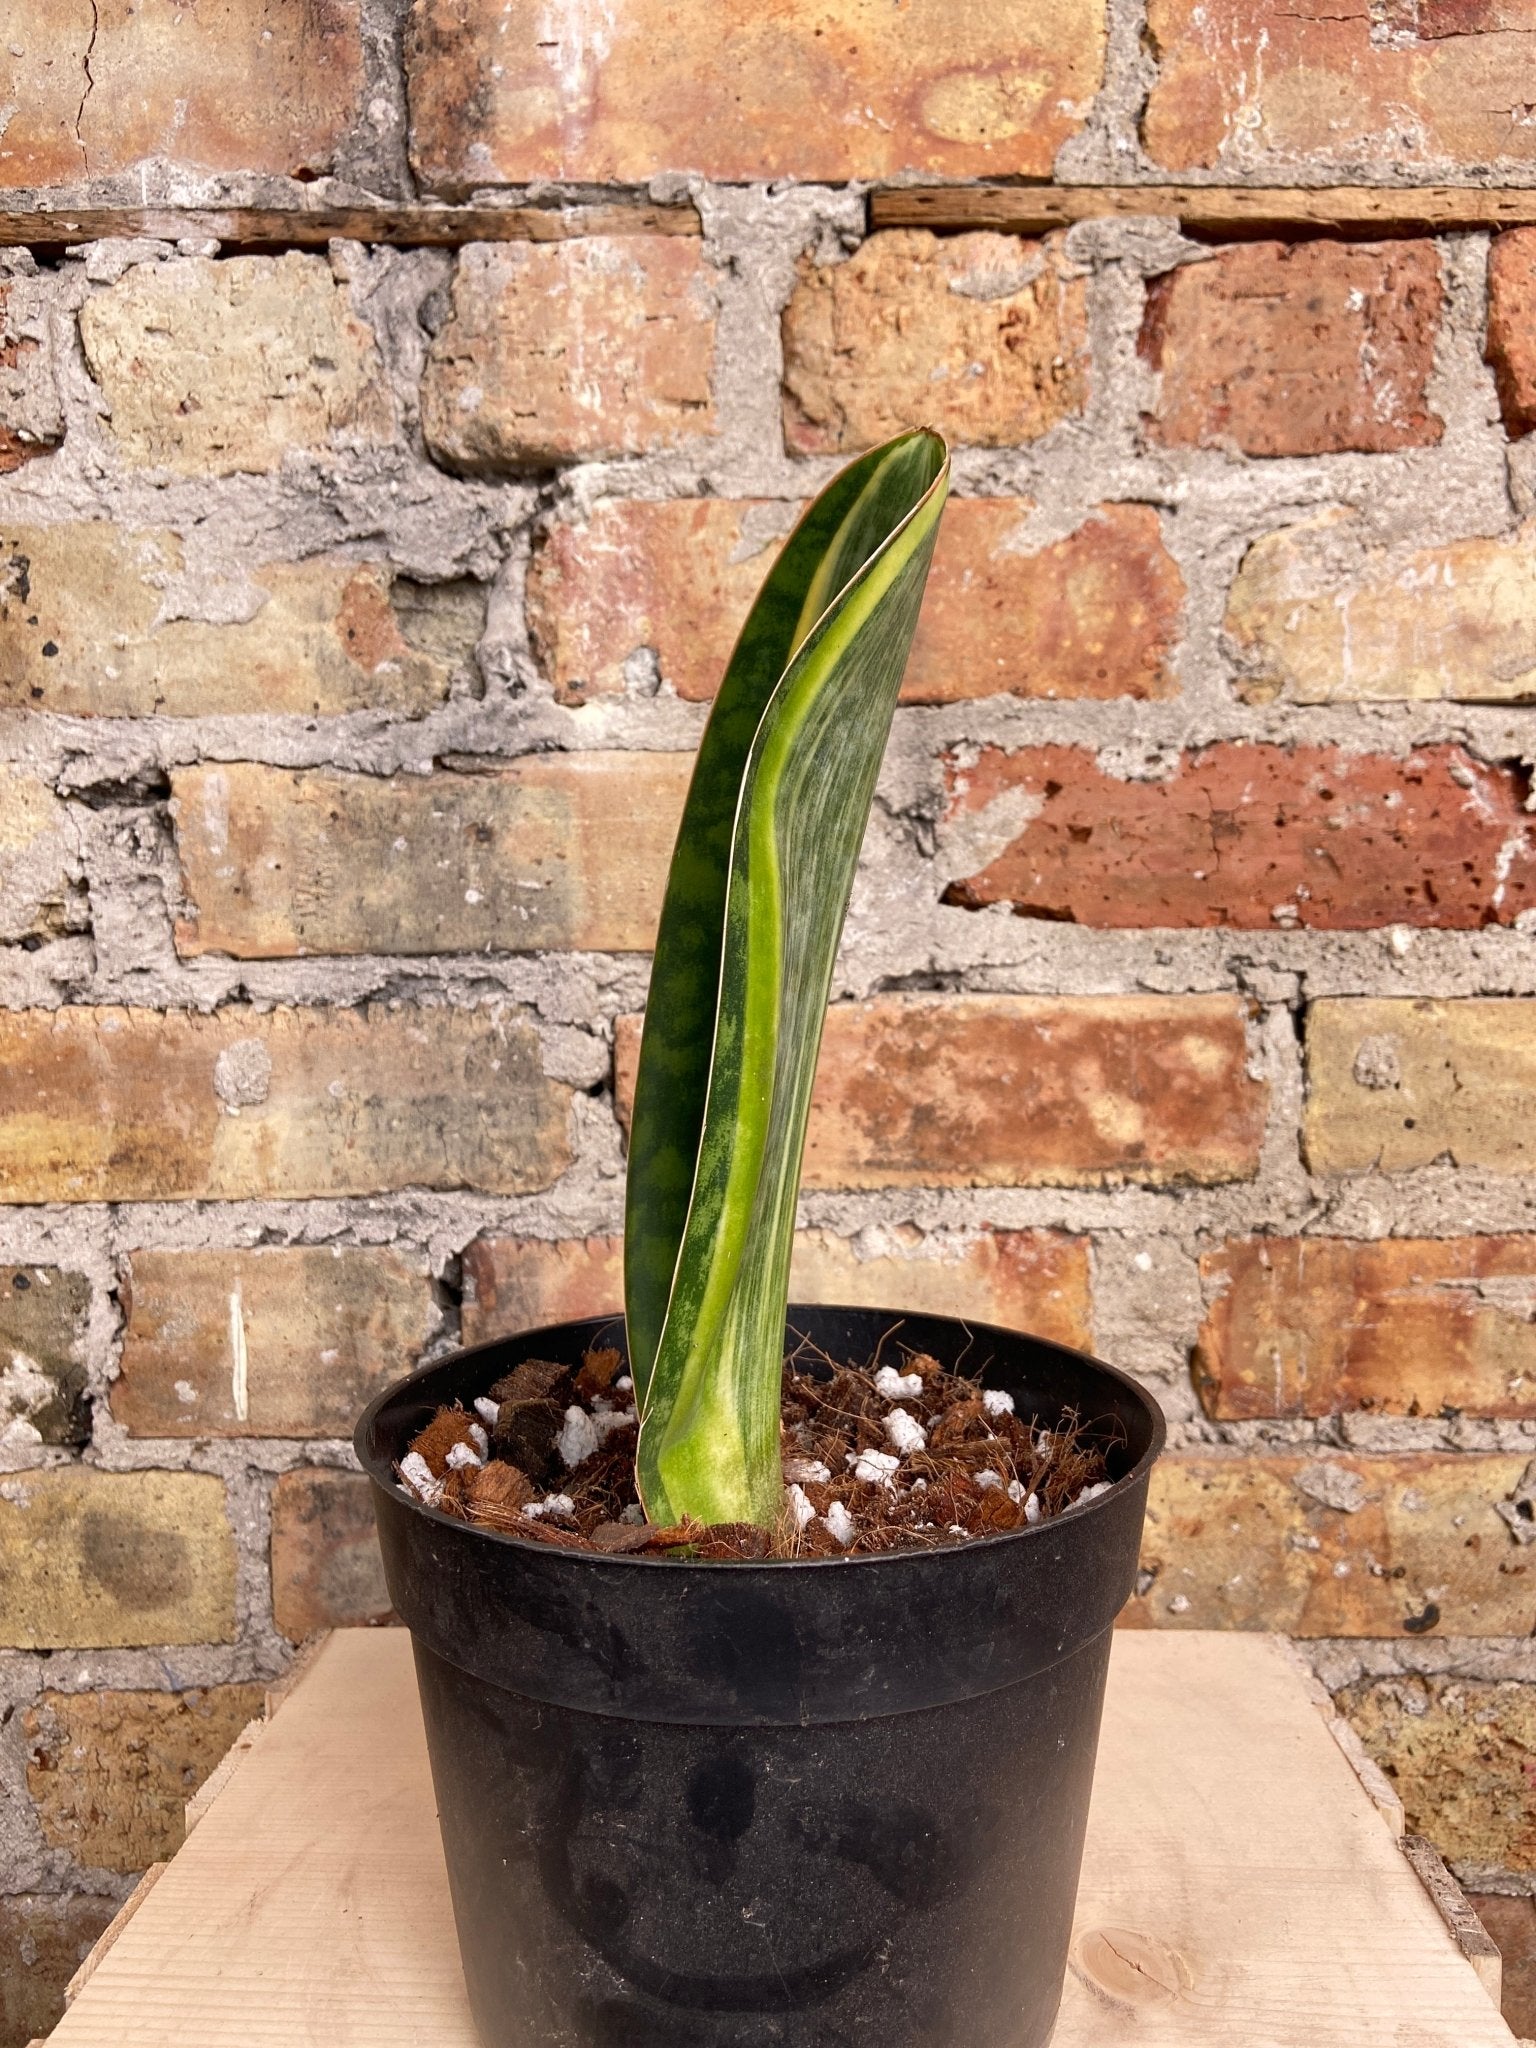 Sansevieria Masoniana "Whale Fin" (Variegated) - 1FT Tall - The Succulent City